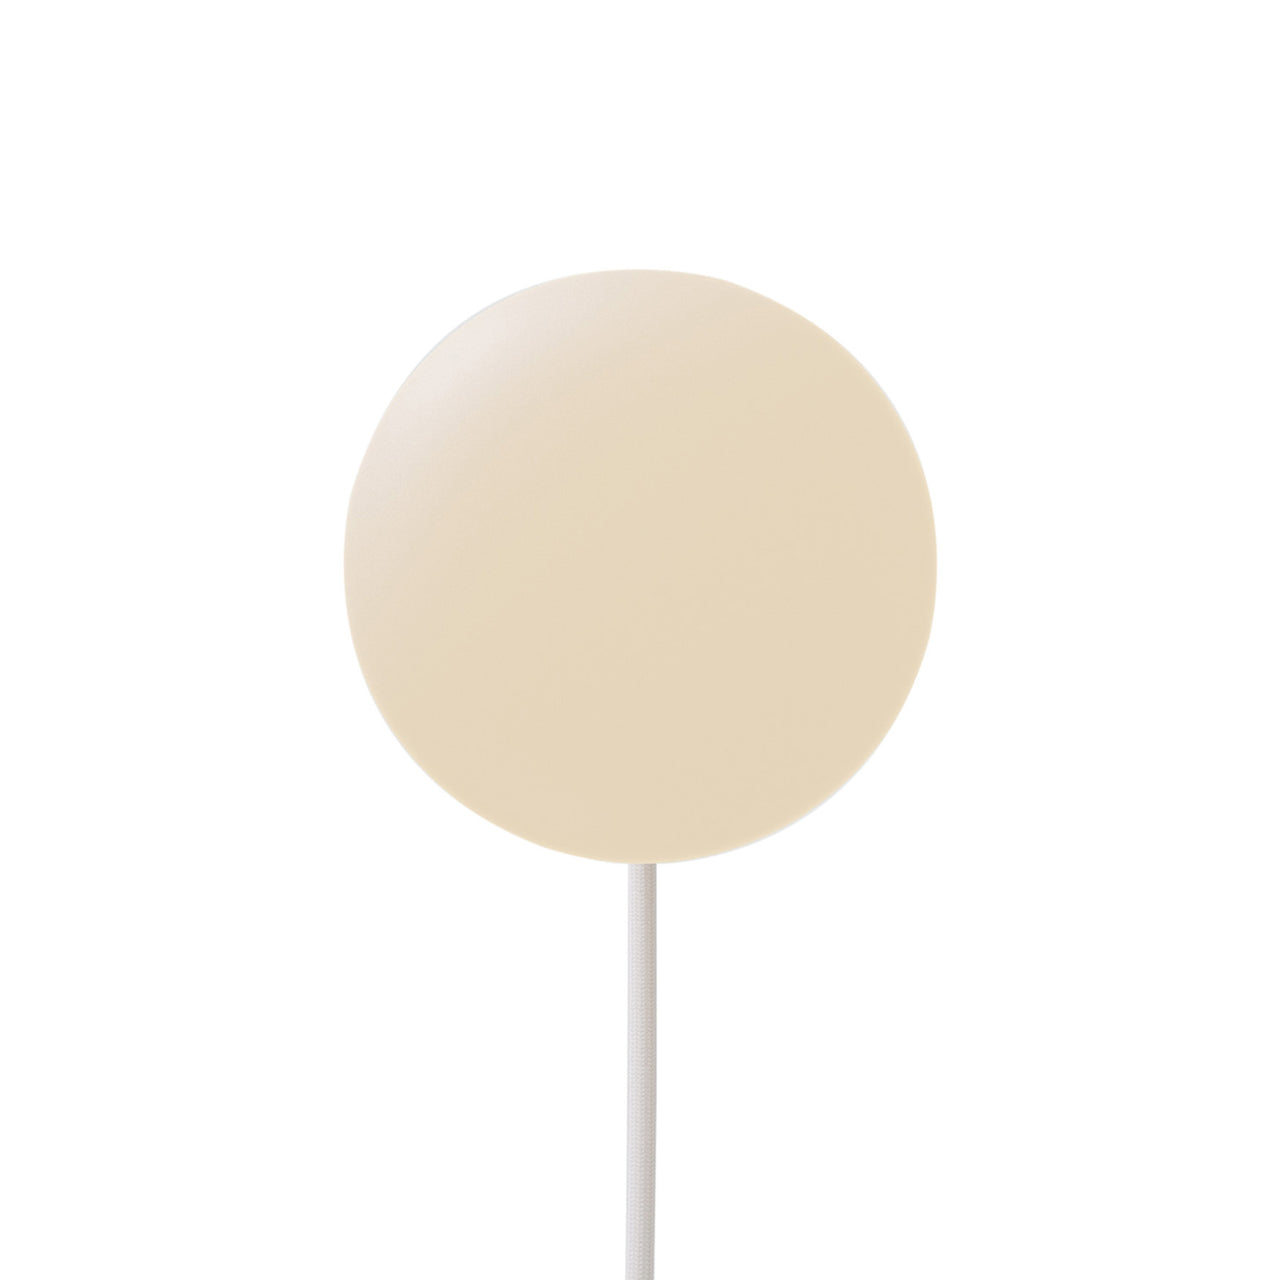 Parc 01 Table Lamp: Handswitch + Beige